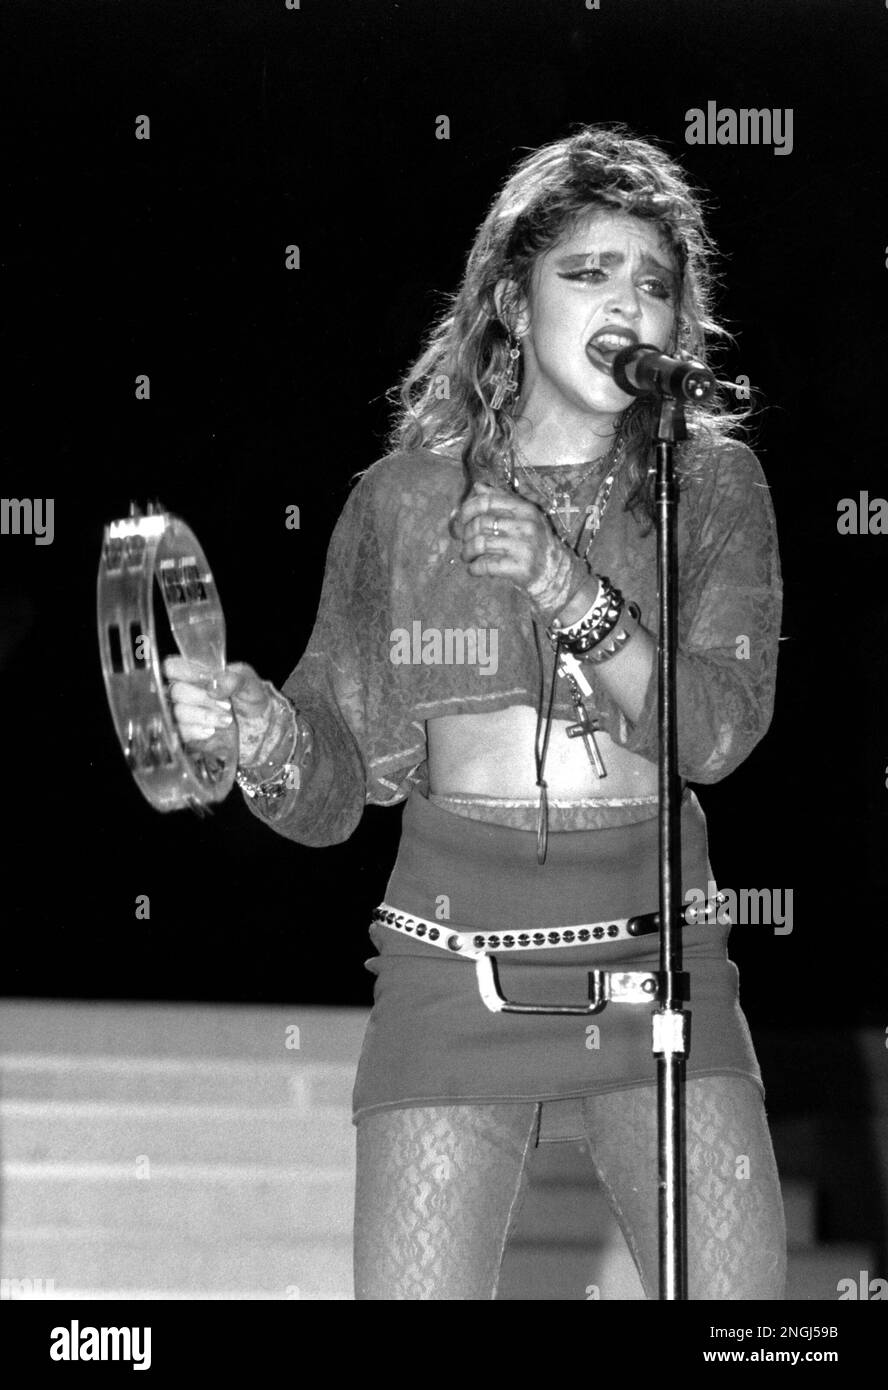 Madonna sings during a Live Aid concert in Philadelphia's JFK 